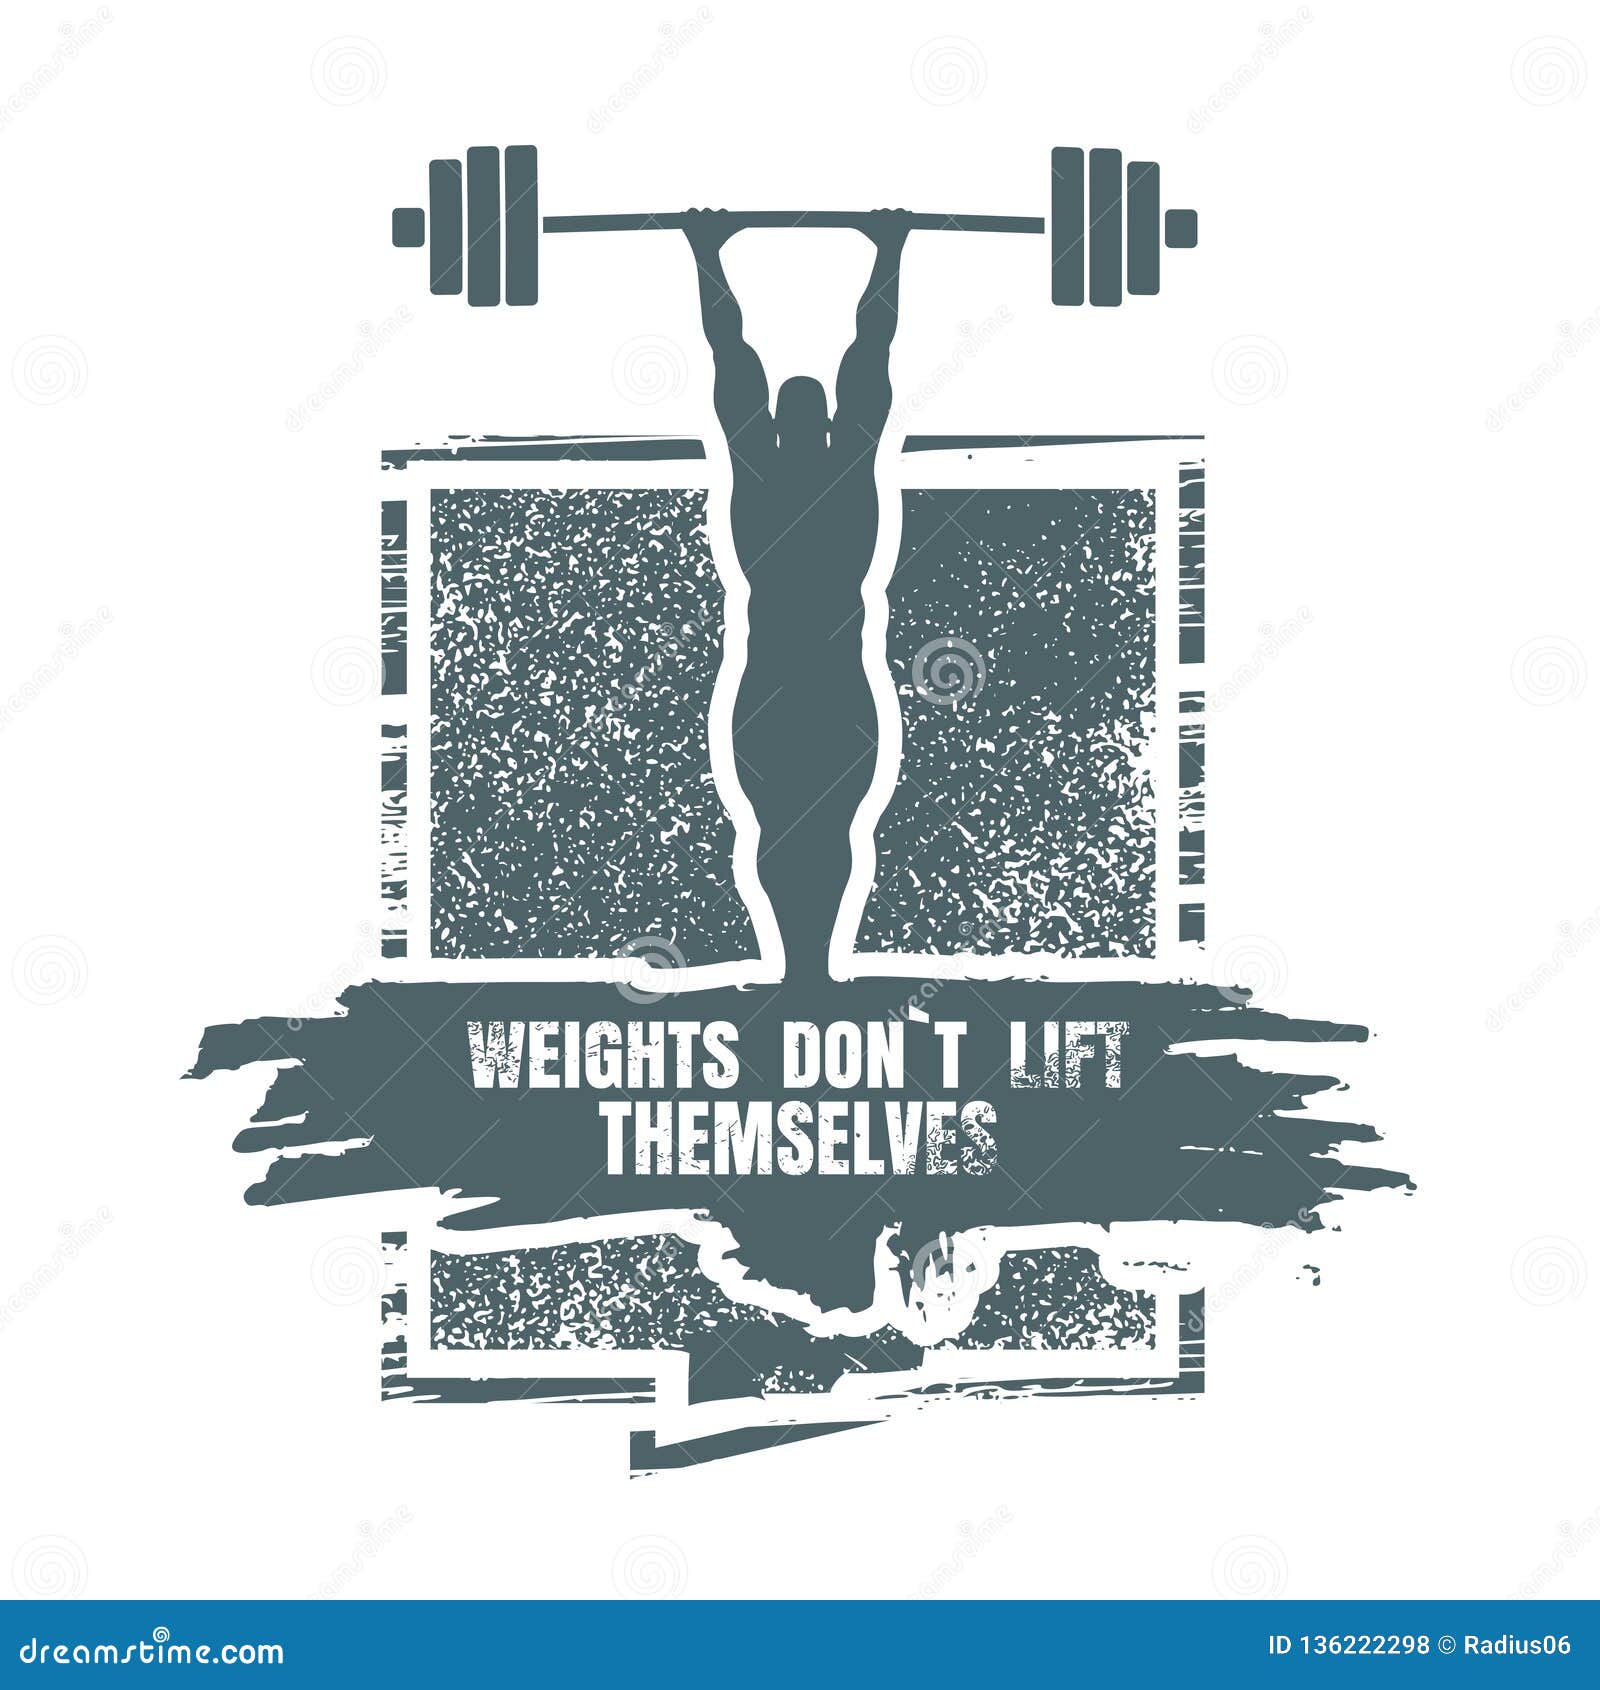 weights dont lift themselfs quote.